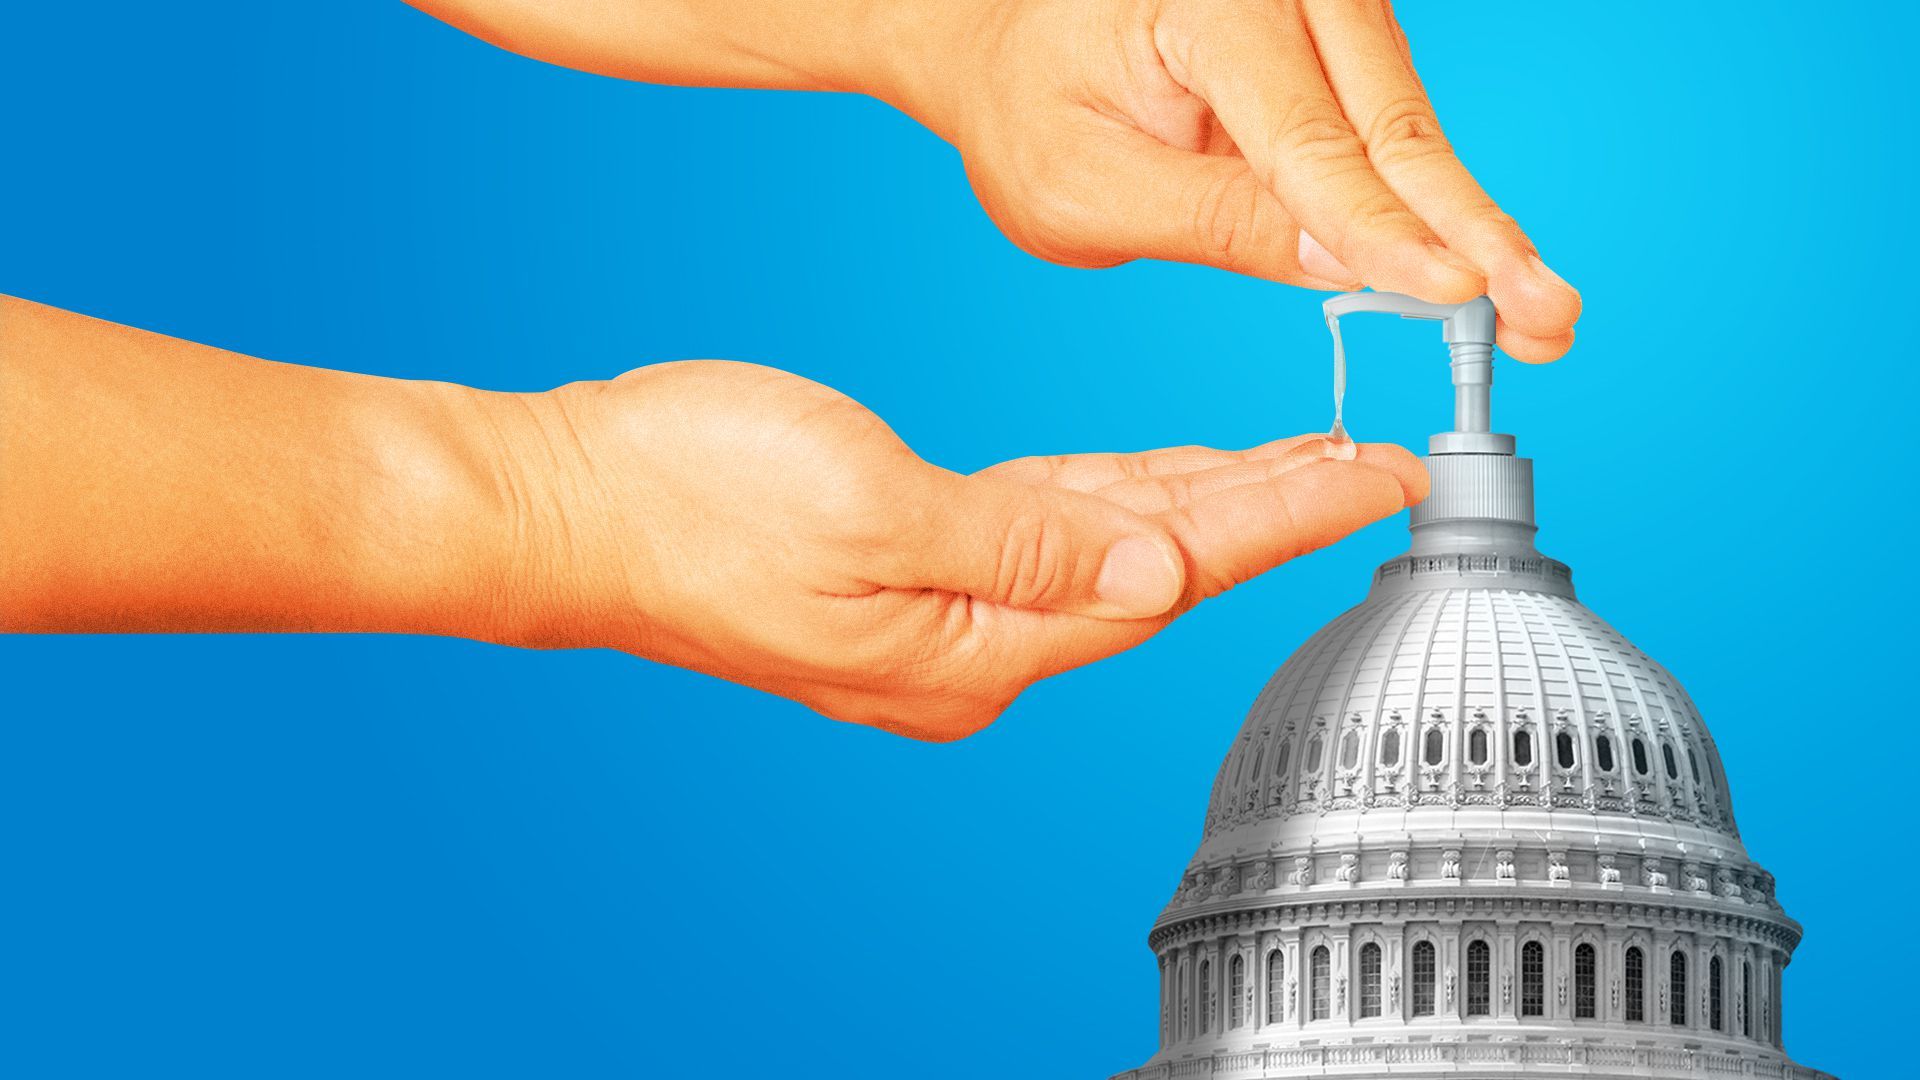 Illustration of the Capitol dome with a hand sanitizer nozzle and a pair of hands squeezing out hand sanitizer.